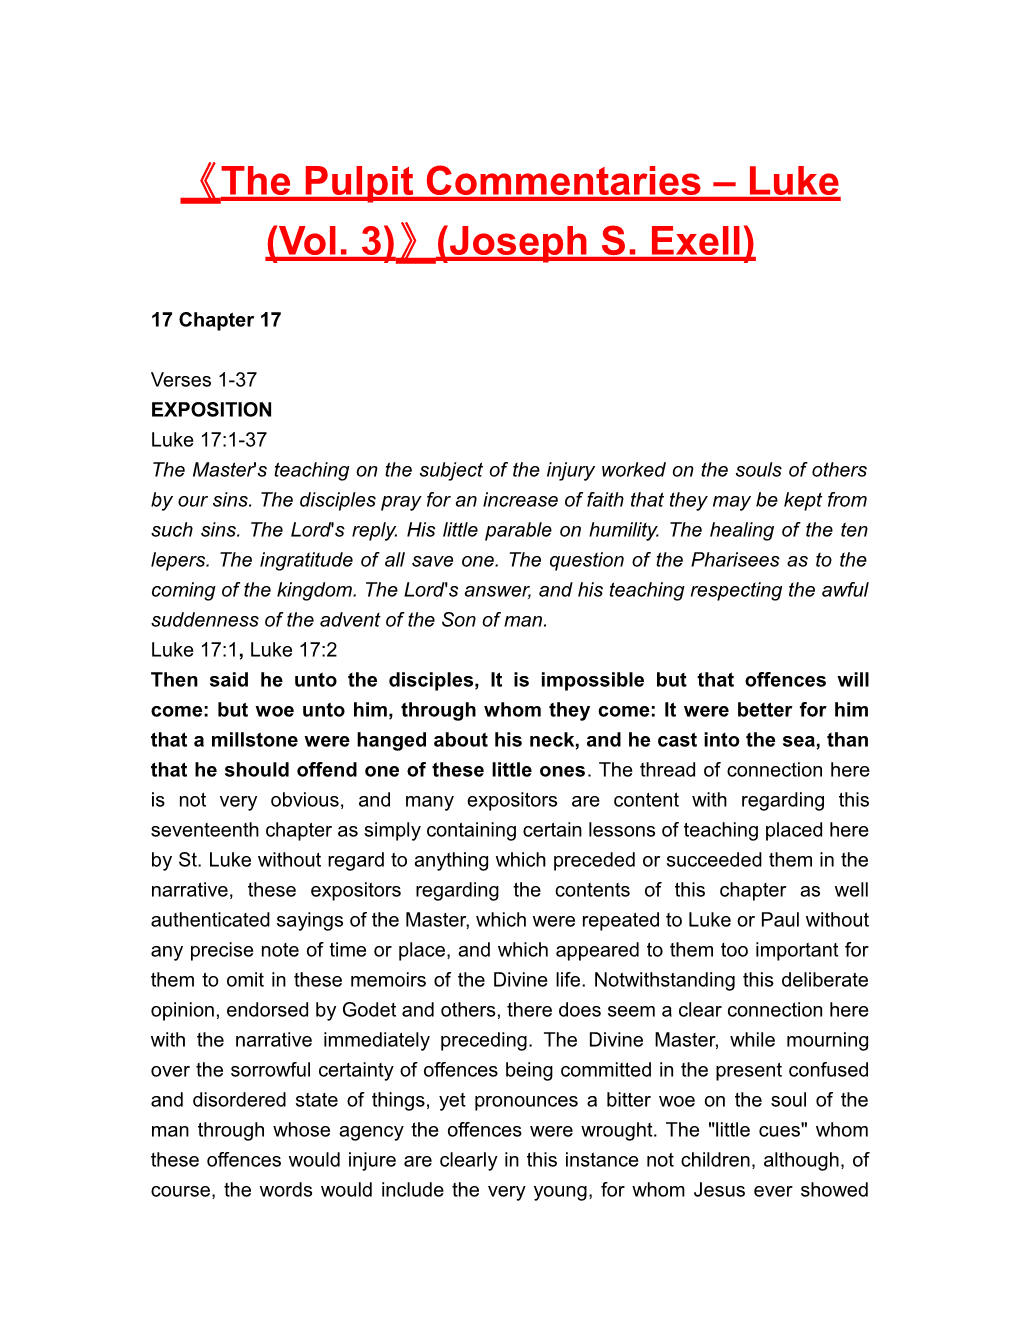 The Pulpit Commentaries Luke (Vol. 3) (Joseph S. Exell)